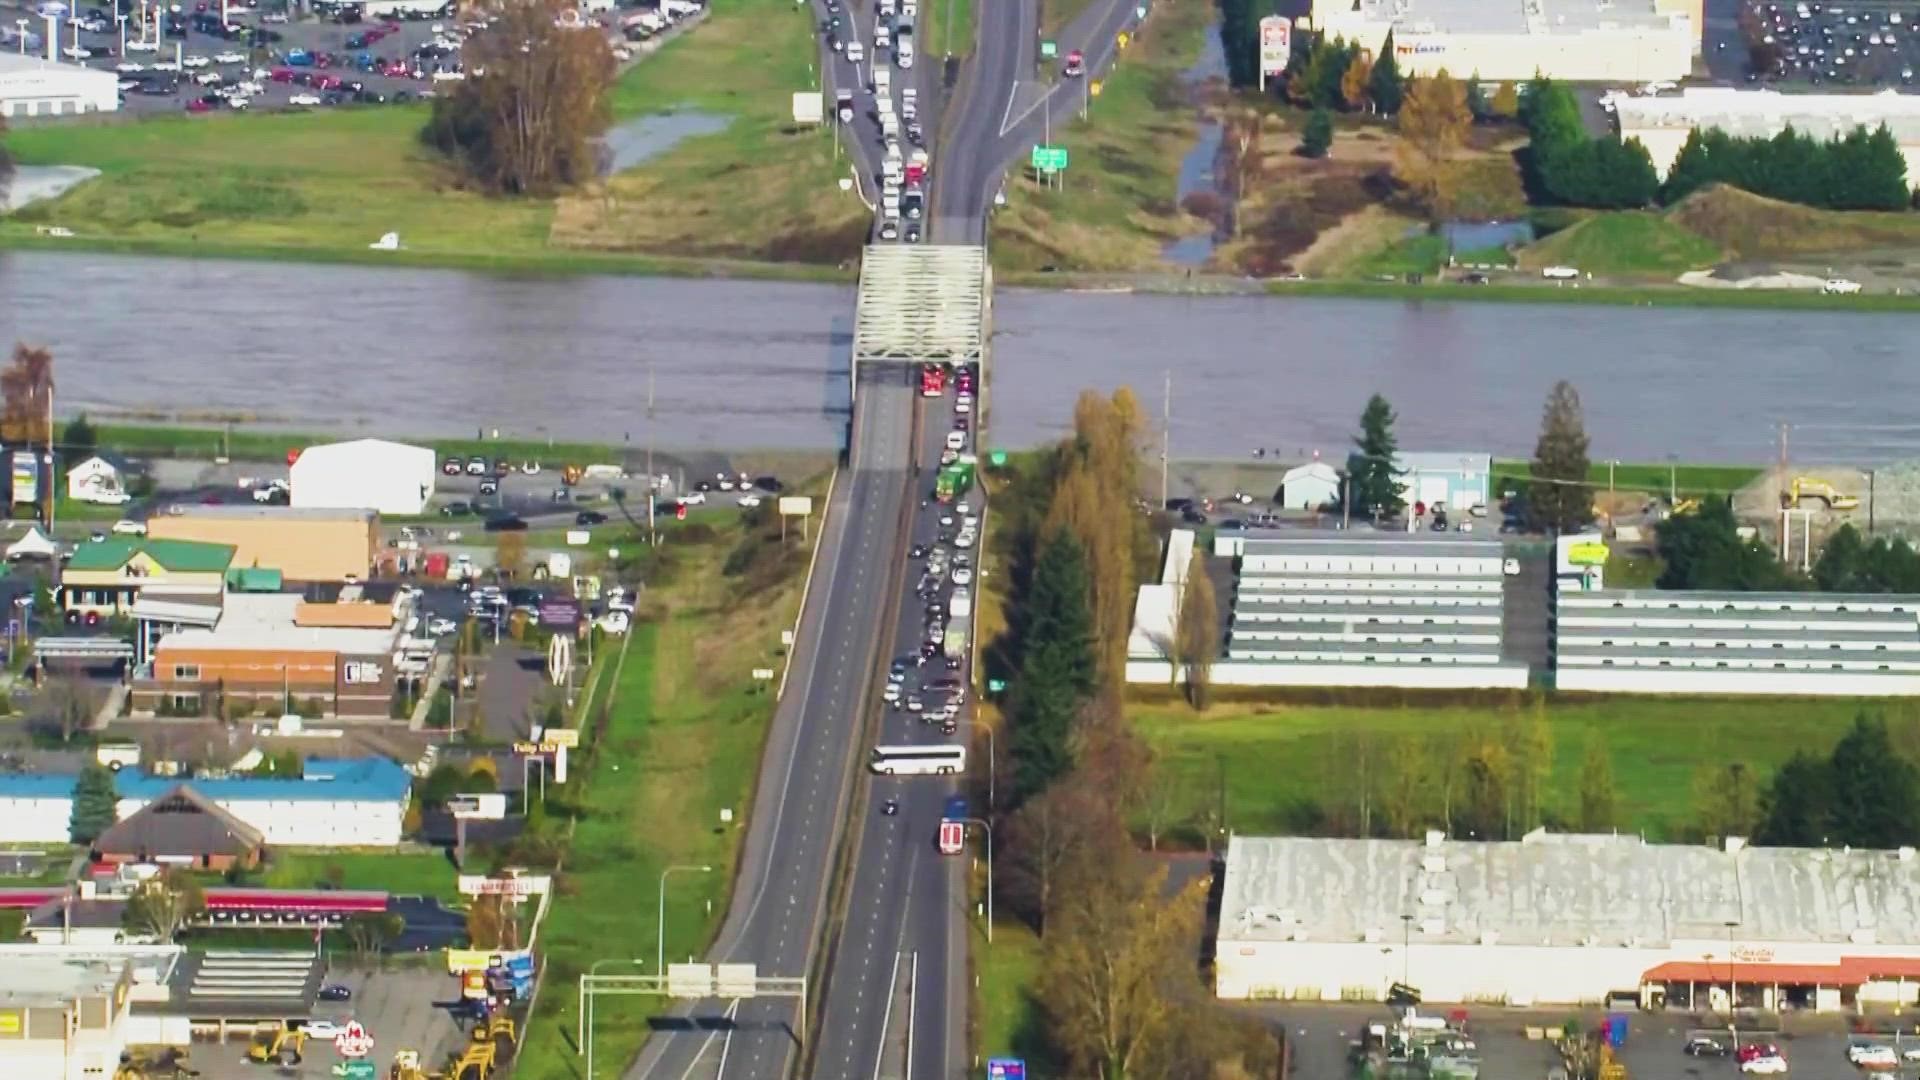 A serious injury crash blocked northbound and southbound I-5 on the Skagit River Bridge in Mount Vernon on Nov. 16, 2021